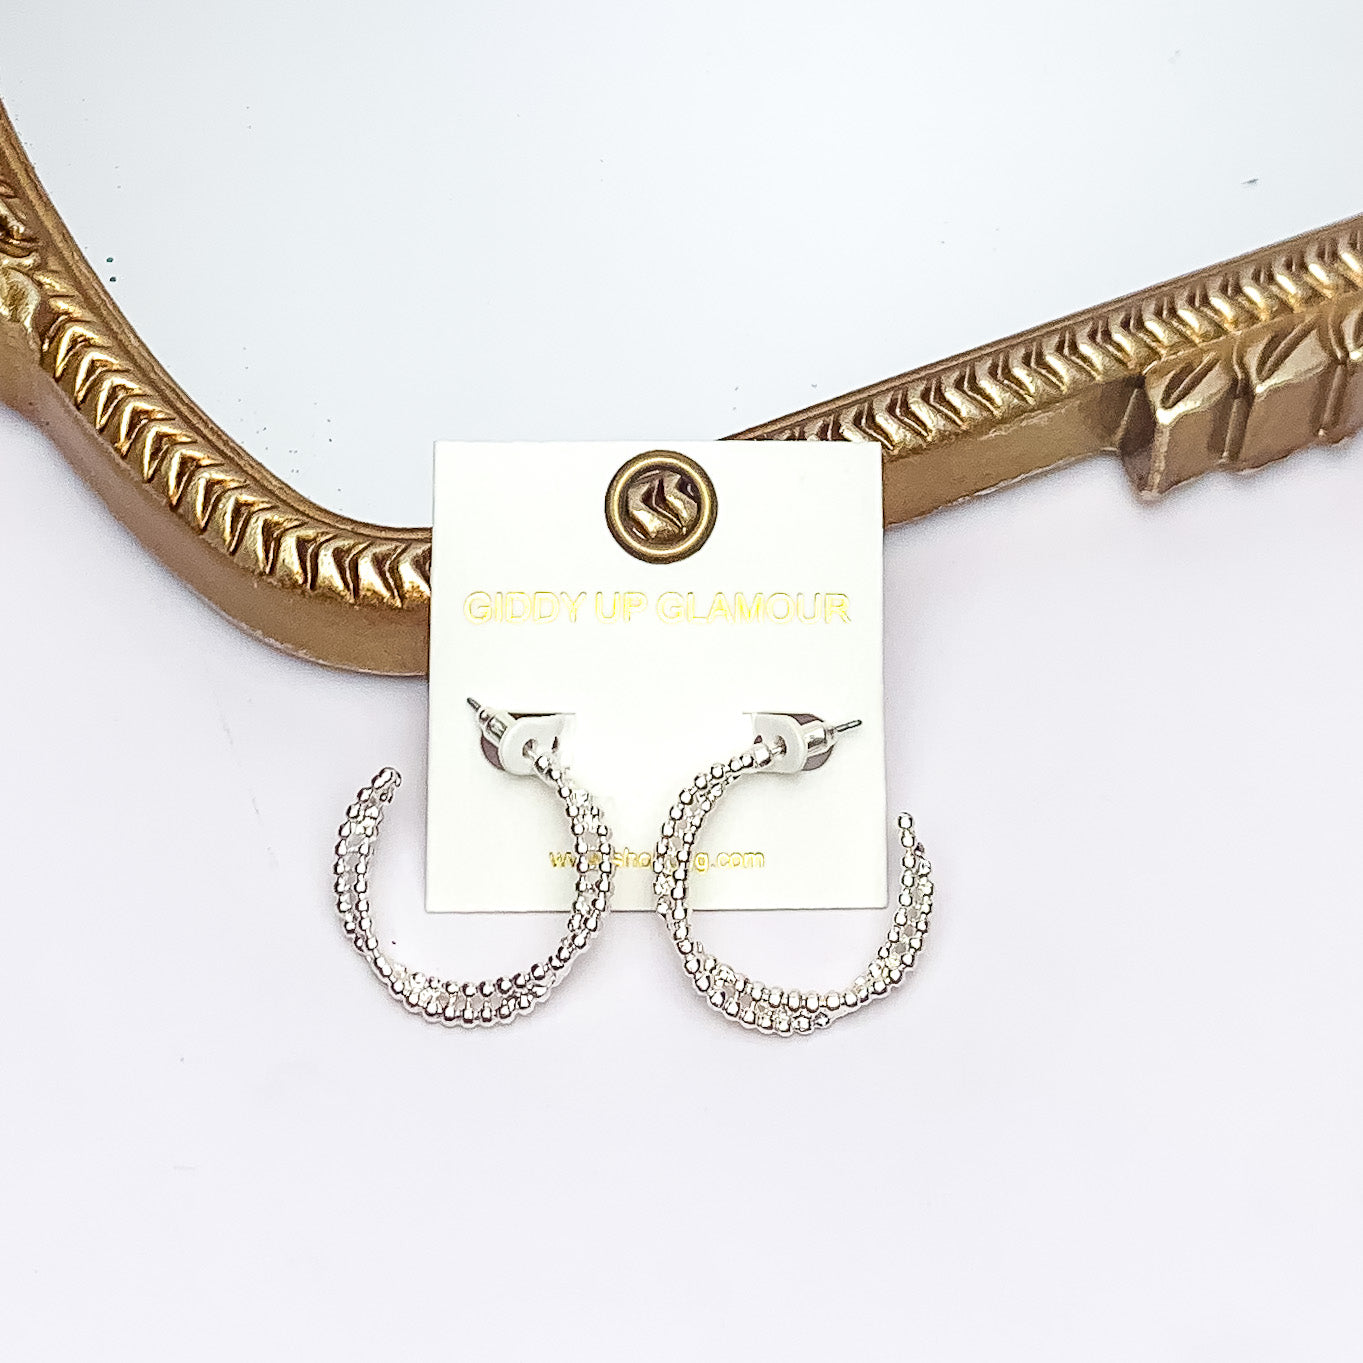 Everyday Glam Double Twisted Hoop Earrings in Silver Tone. Pictured on a white background with a gold frame behind the earrings.